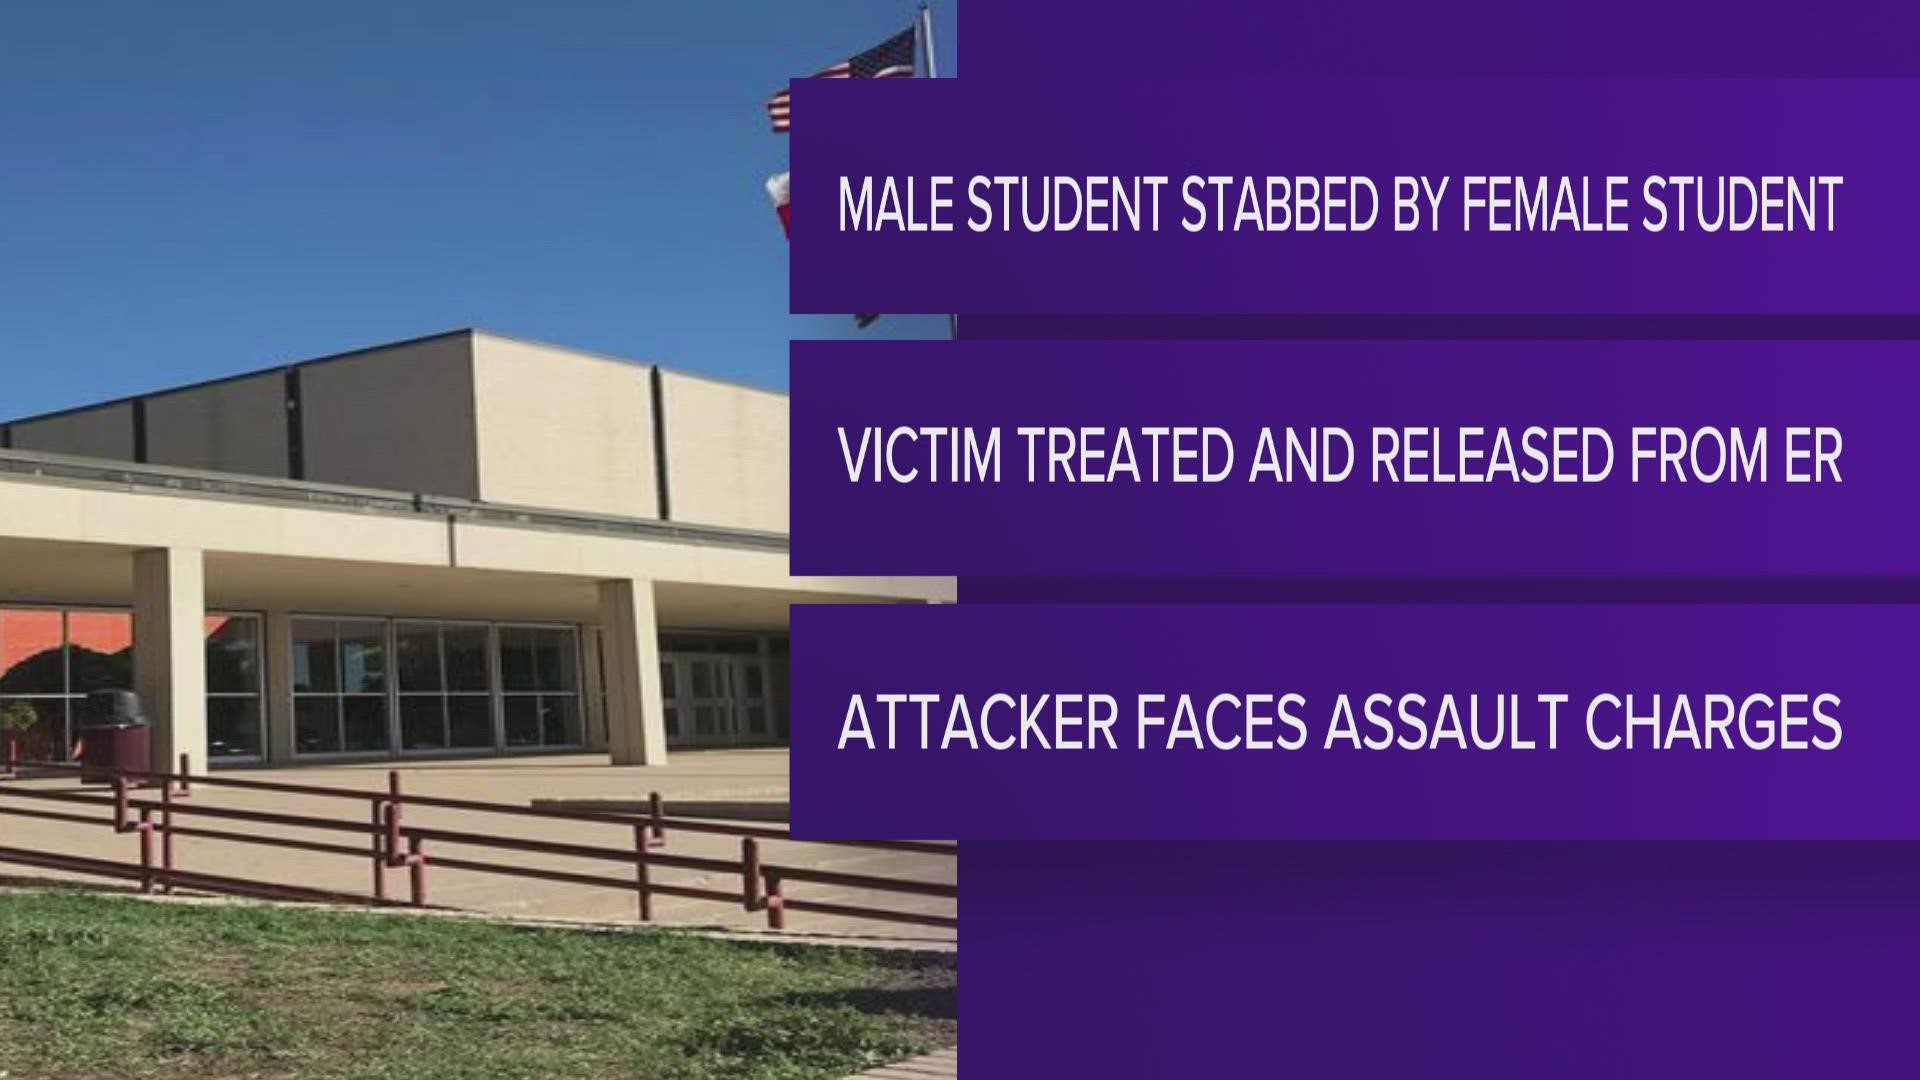 MISD says it believes the male student was stabbed following a verbal argument with a female student.